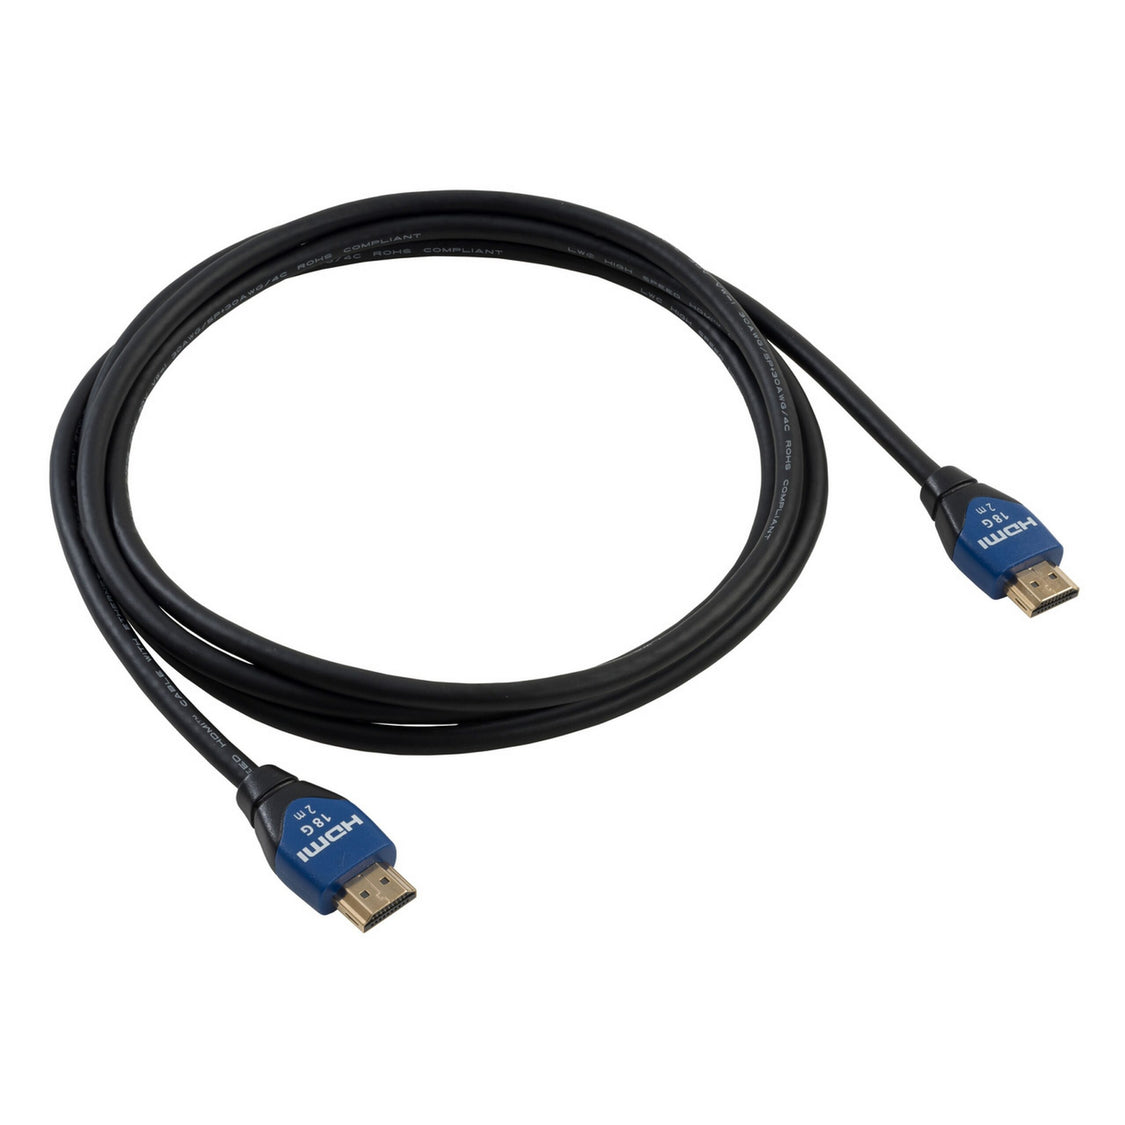 Liberty AV HALO-HC23M 23-Meter HALO Series High Speed HDMI Cable with Ethernet